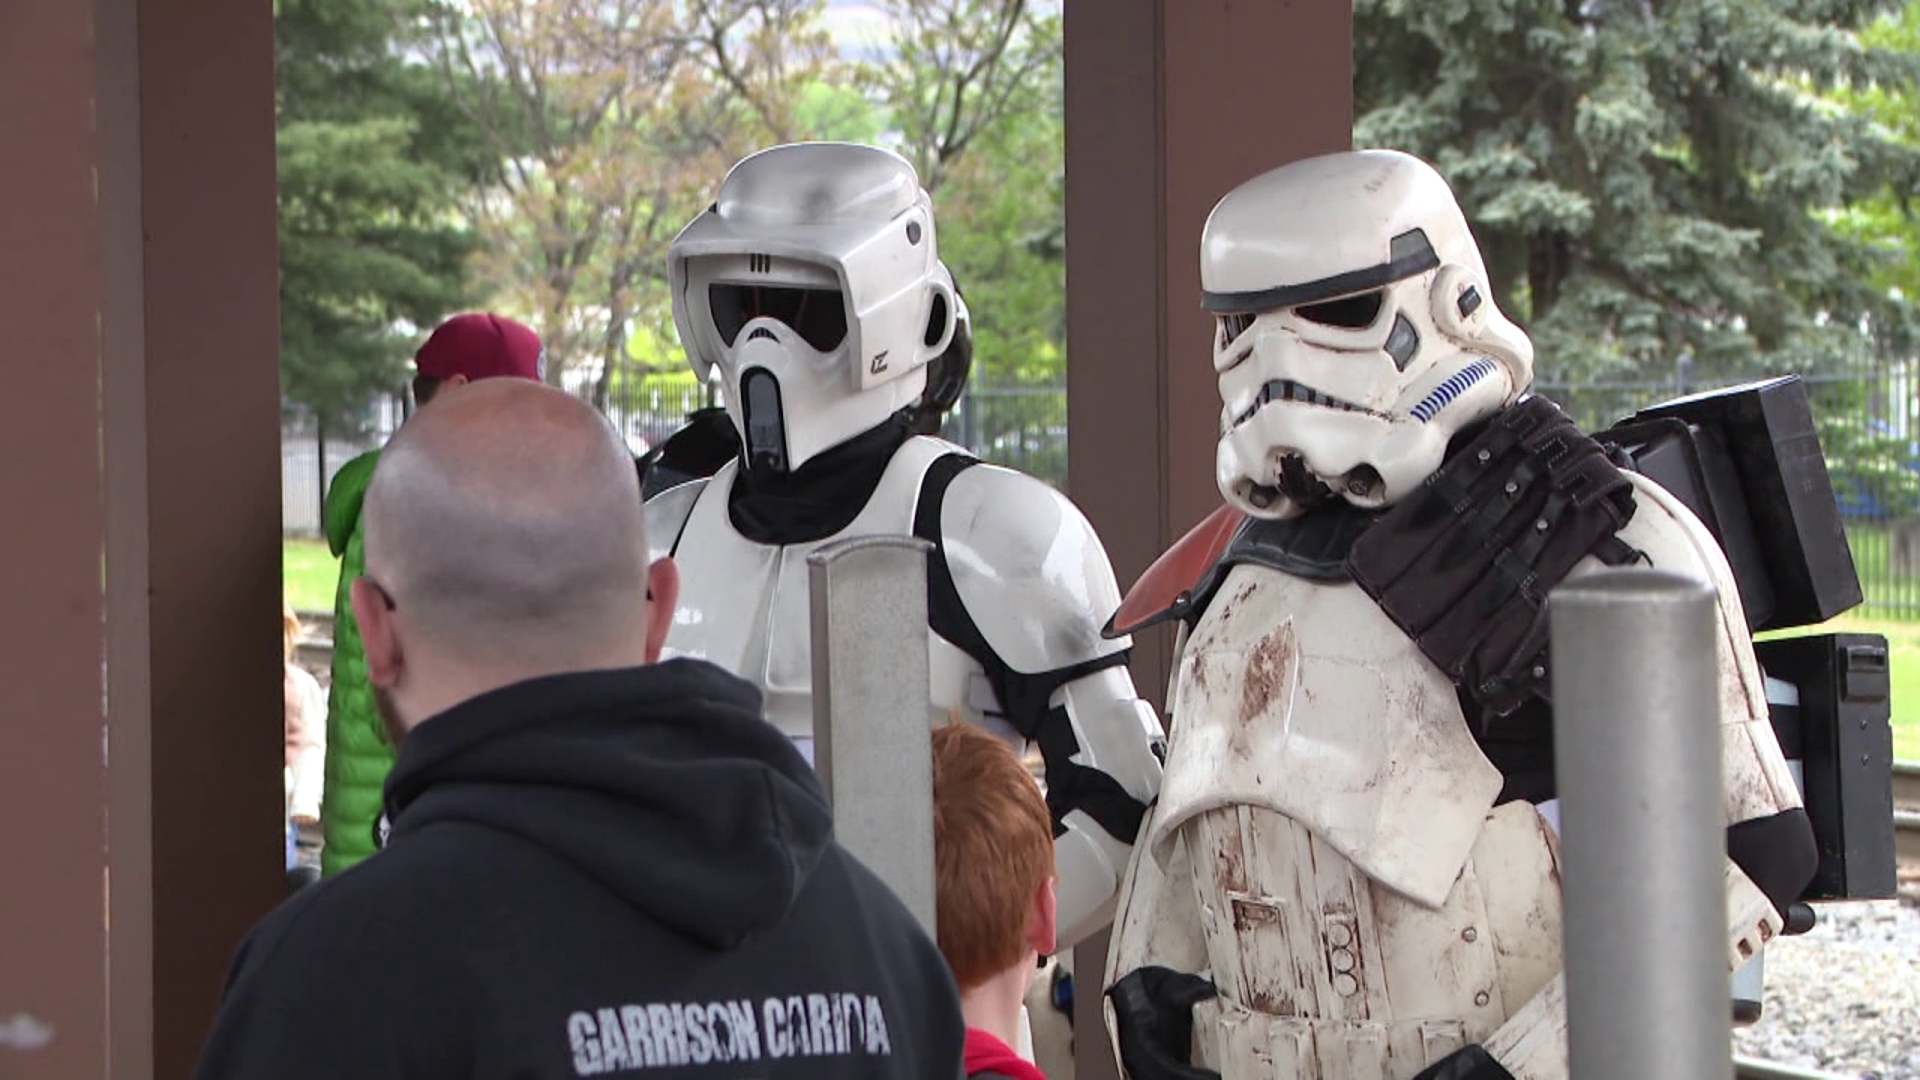 Folks in Scranton celebrated May 4th, or Star Wars Day, in all sorts of galactic ways at the Electric City Trolley Museum.